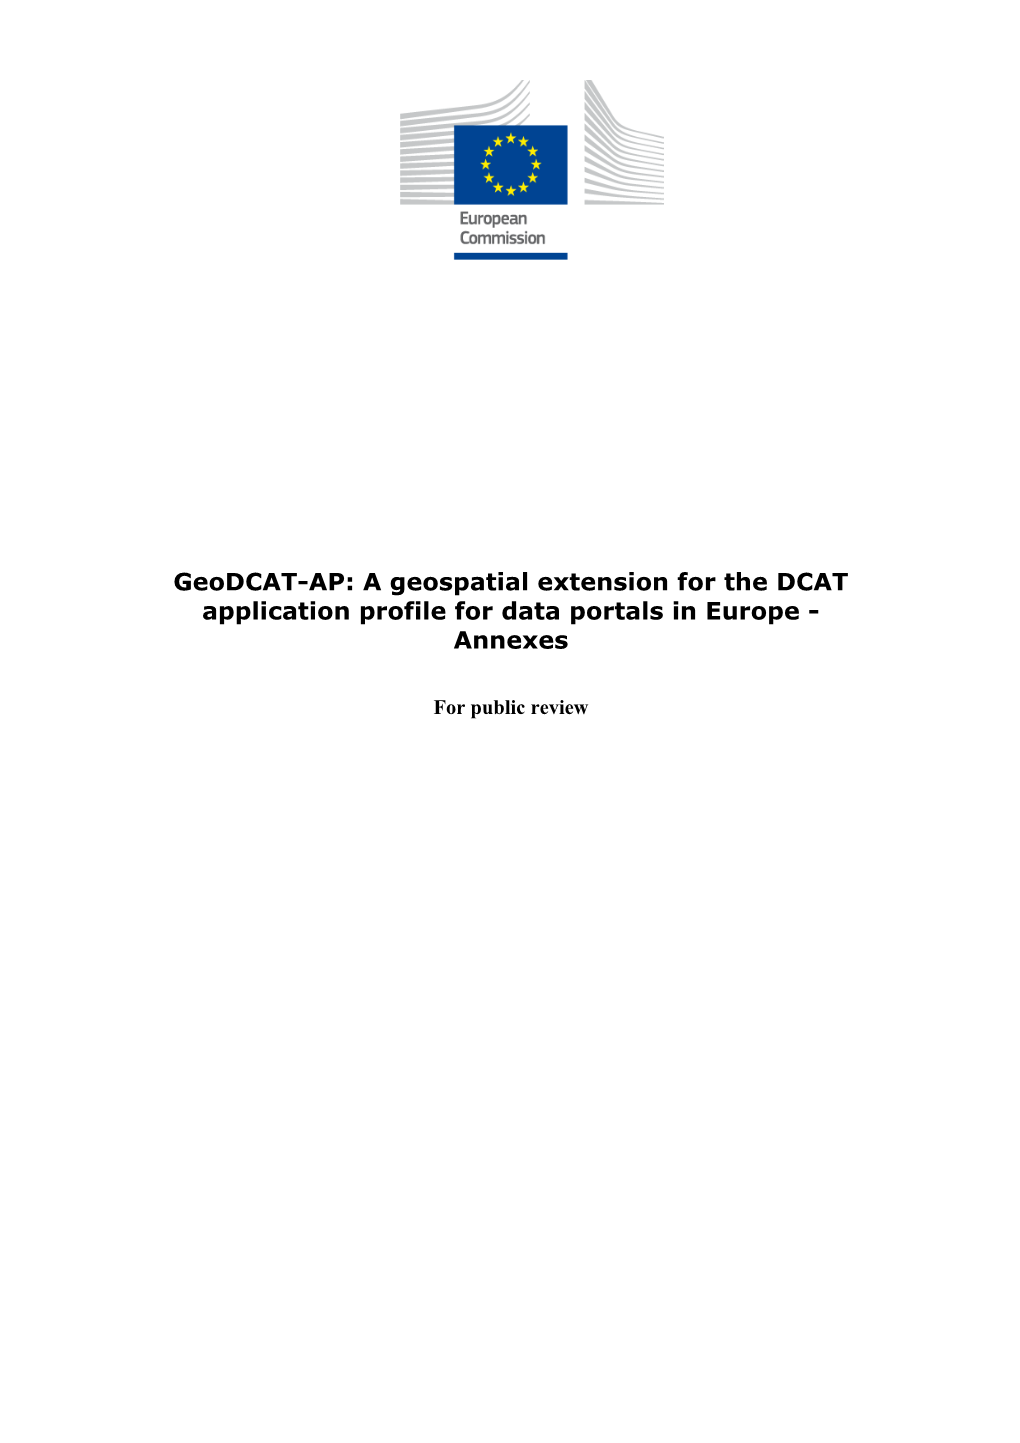 Geodcat-AP: a Geospatial Extension for the DCAT Application Profile for Data Portals In